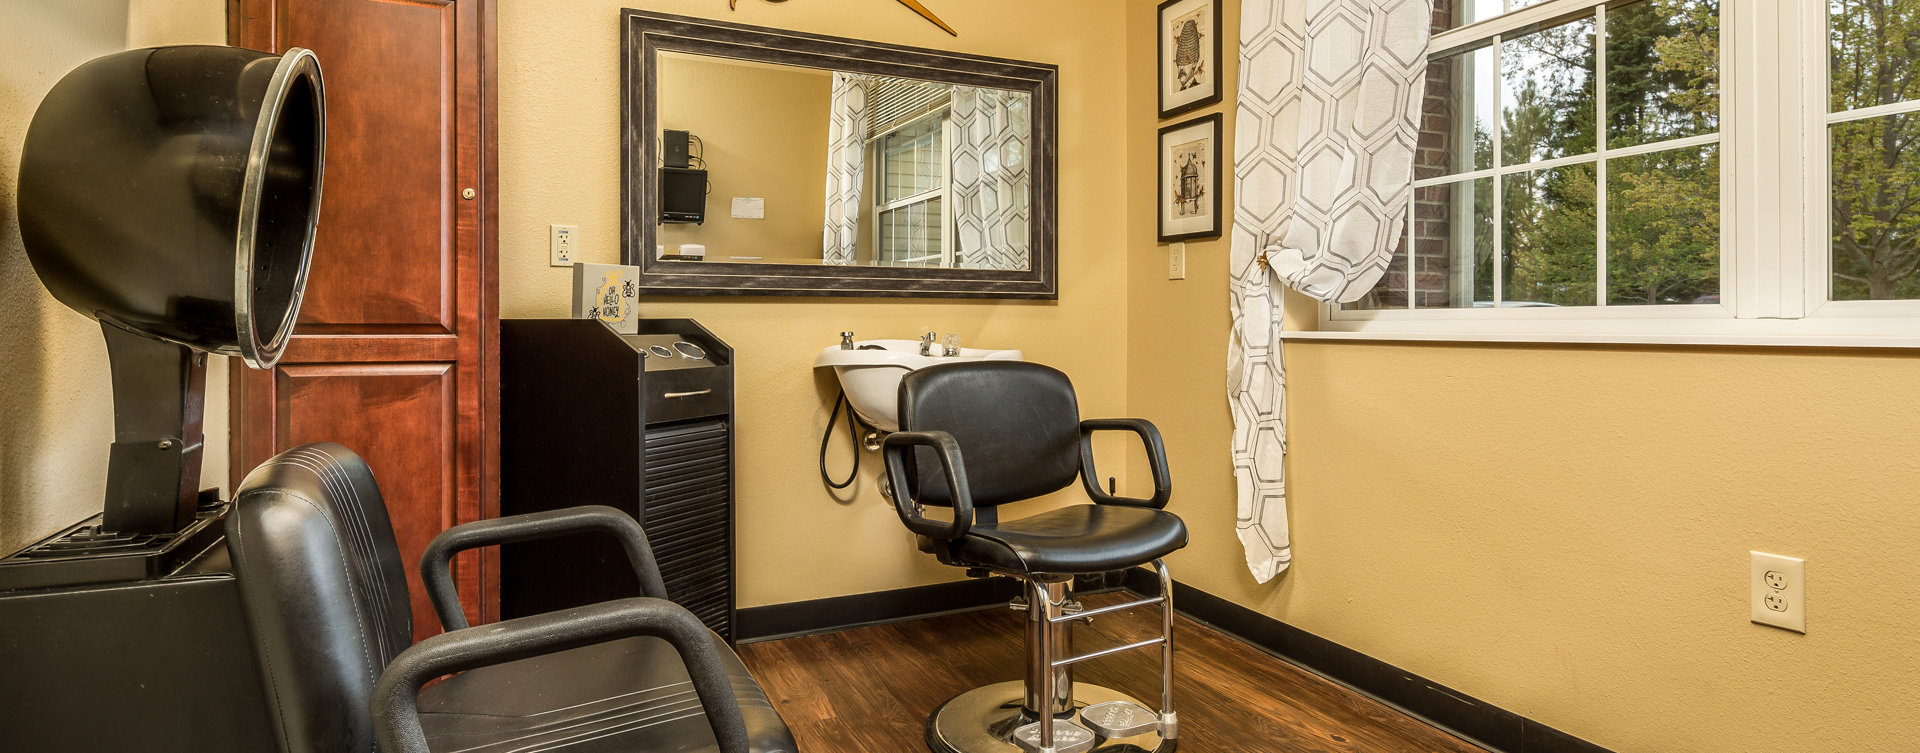 Strut on in and find out what the buzz is all about in the salon at Bickford of Okemos